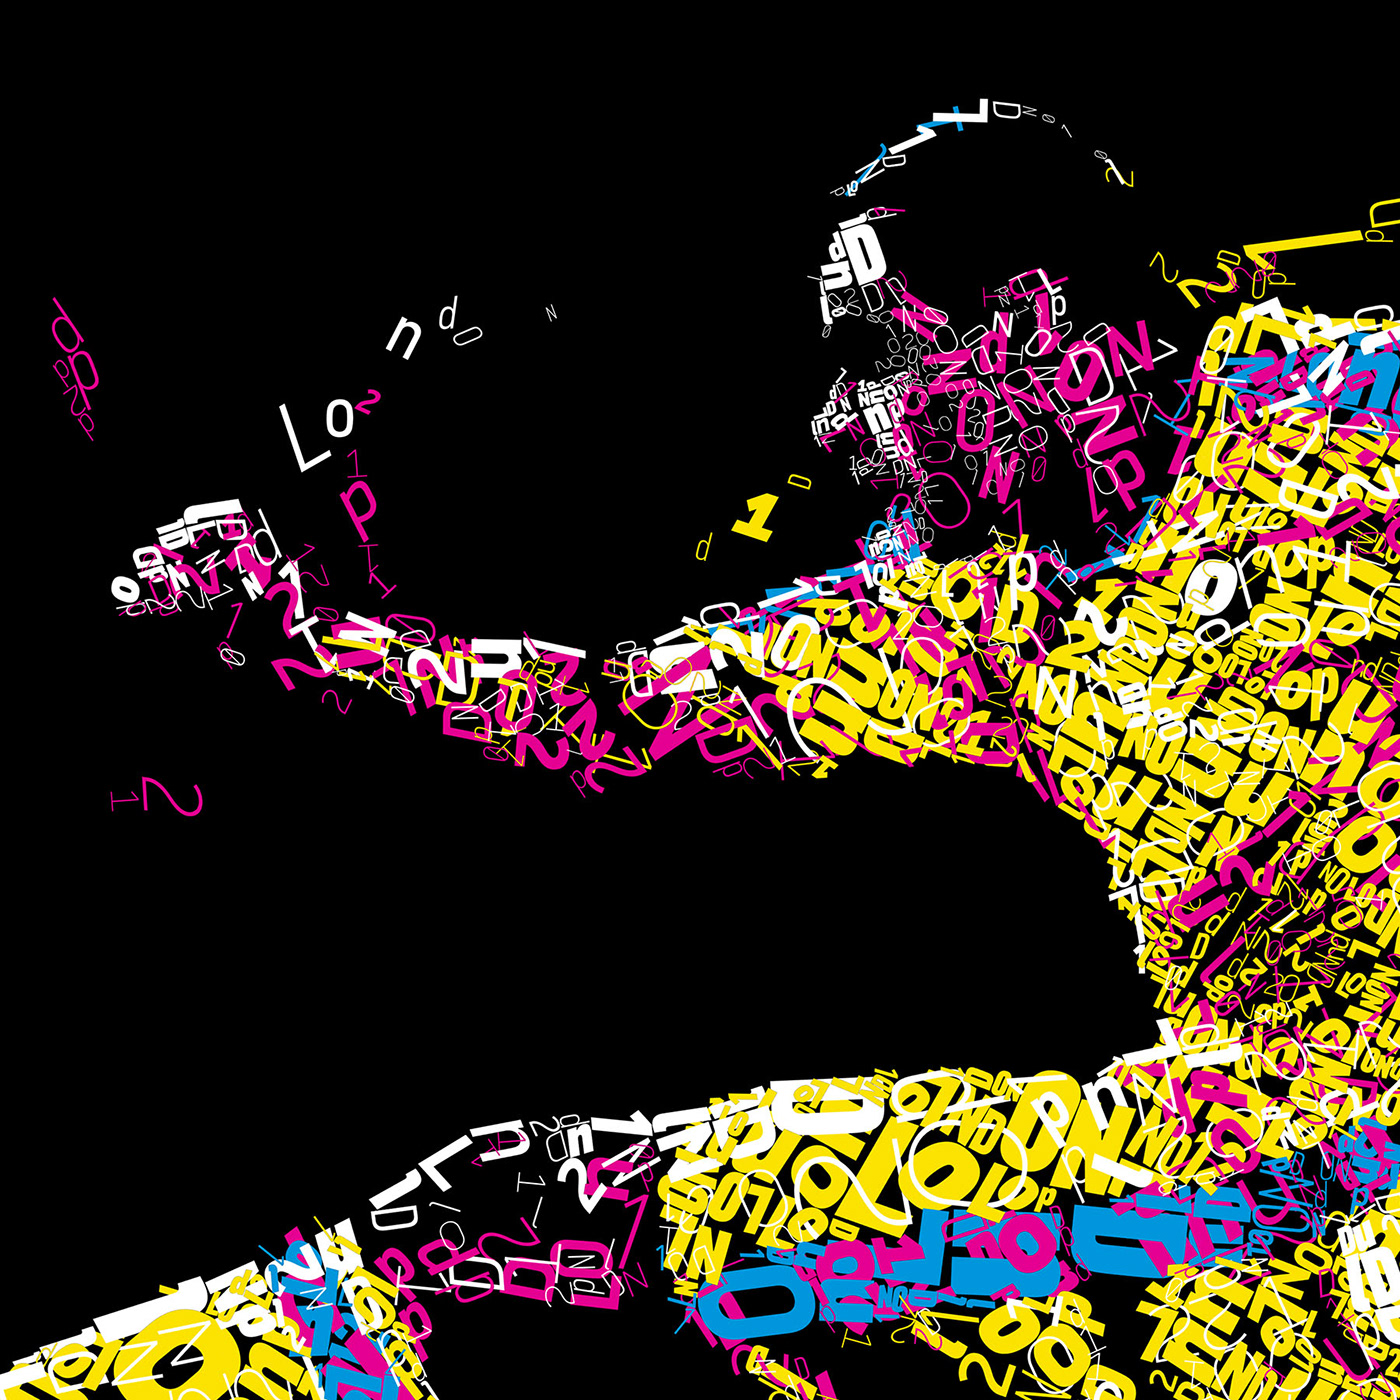 action athlete athletics champion Competition jump jumper Medal medalist London Olympic Games olympiad lettering photomosaic mosaic ascii art Typographic experiment Nike adidas runner basketball soccer football London 2012 Olympics honor gold computer graphics digital design gestalt punk rock collage fluorescent colors rave culture pink magenta tsevis ASCII art sports gymnastics